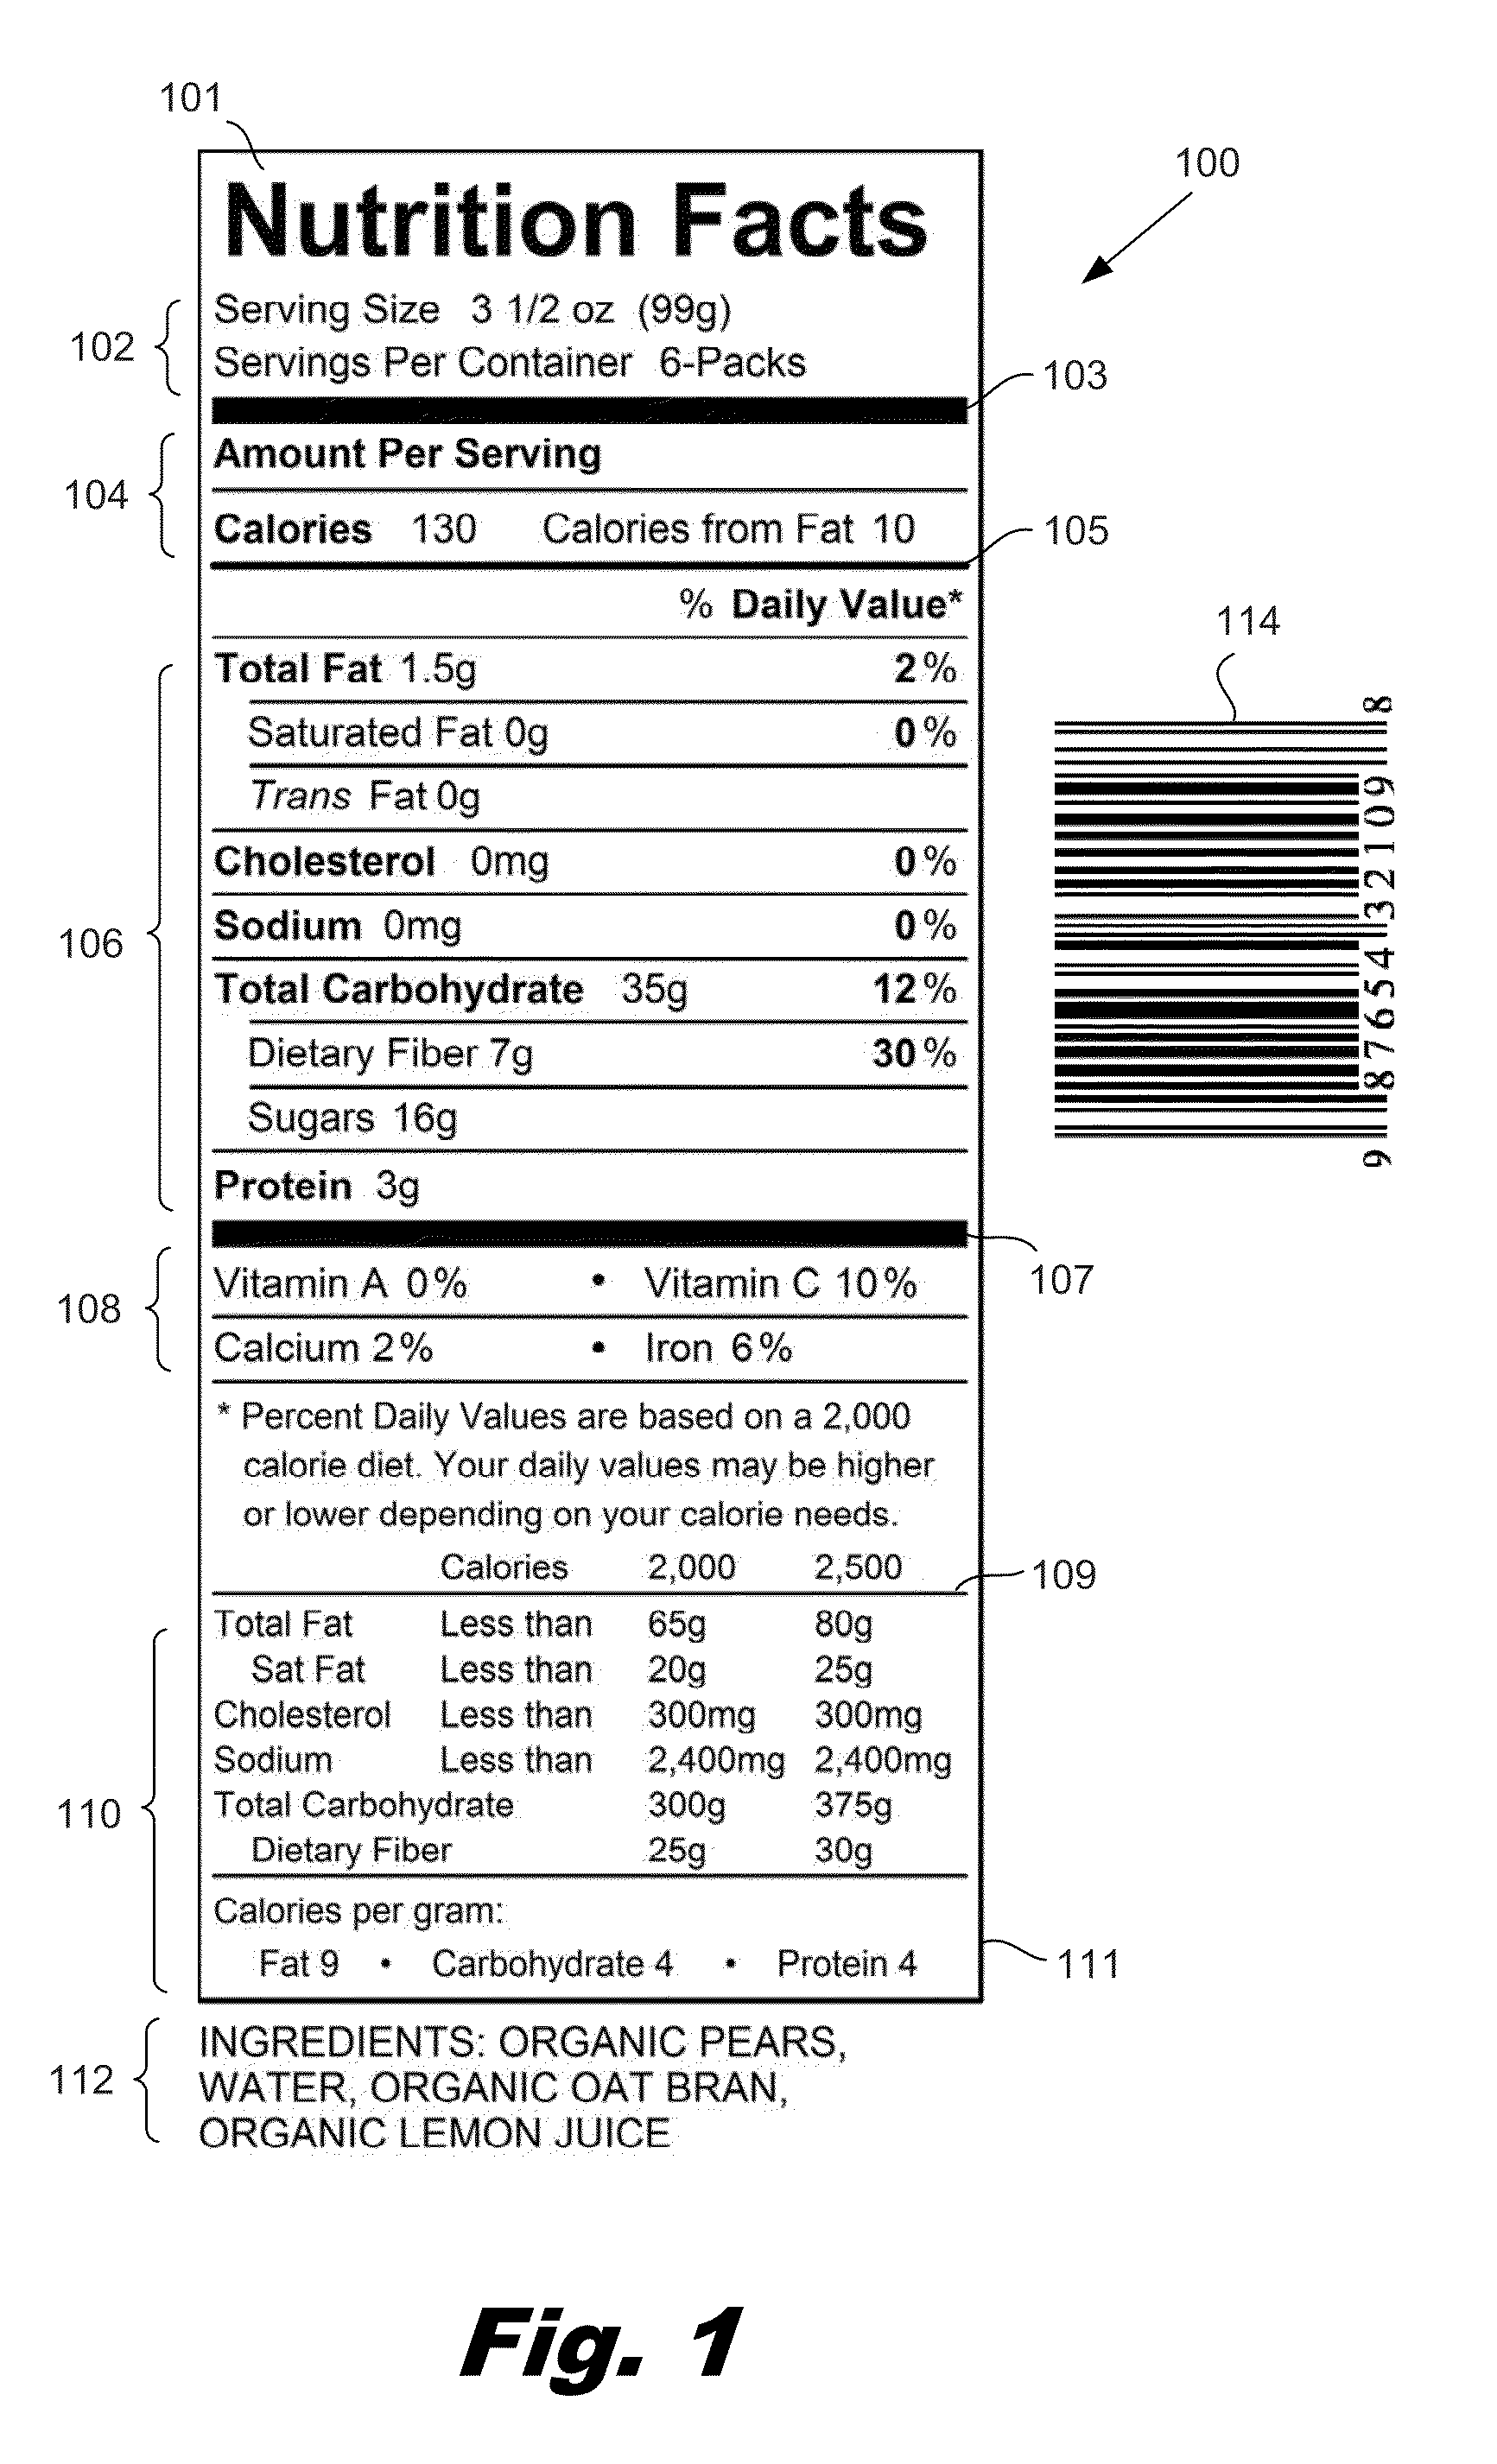 Template-based recognition of food product information